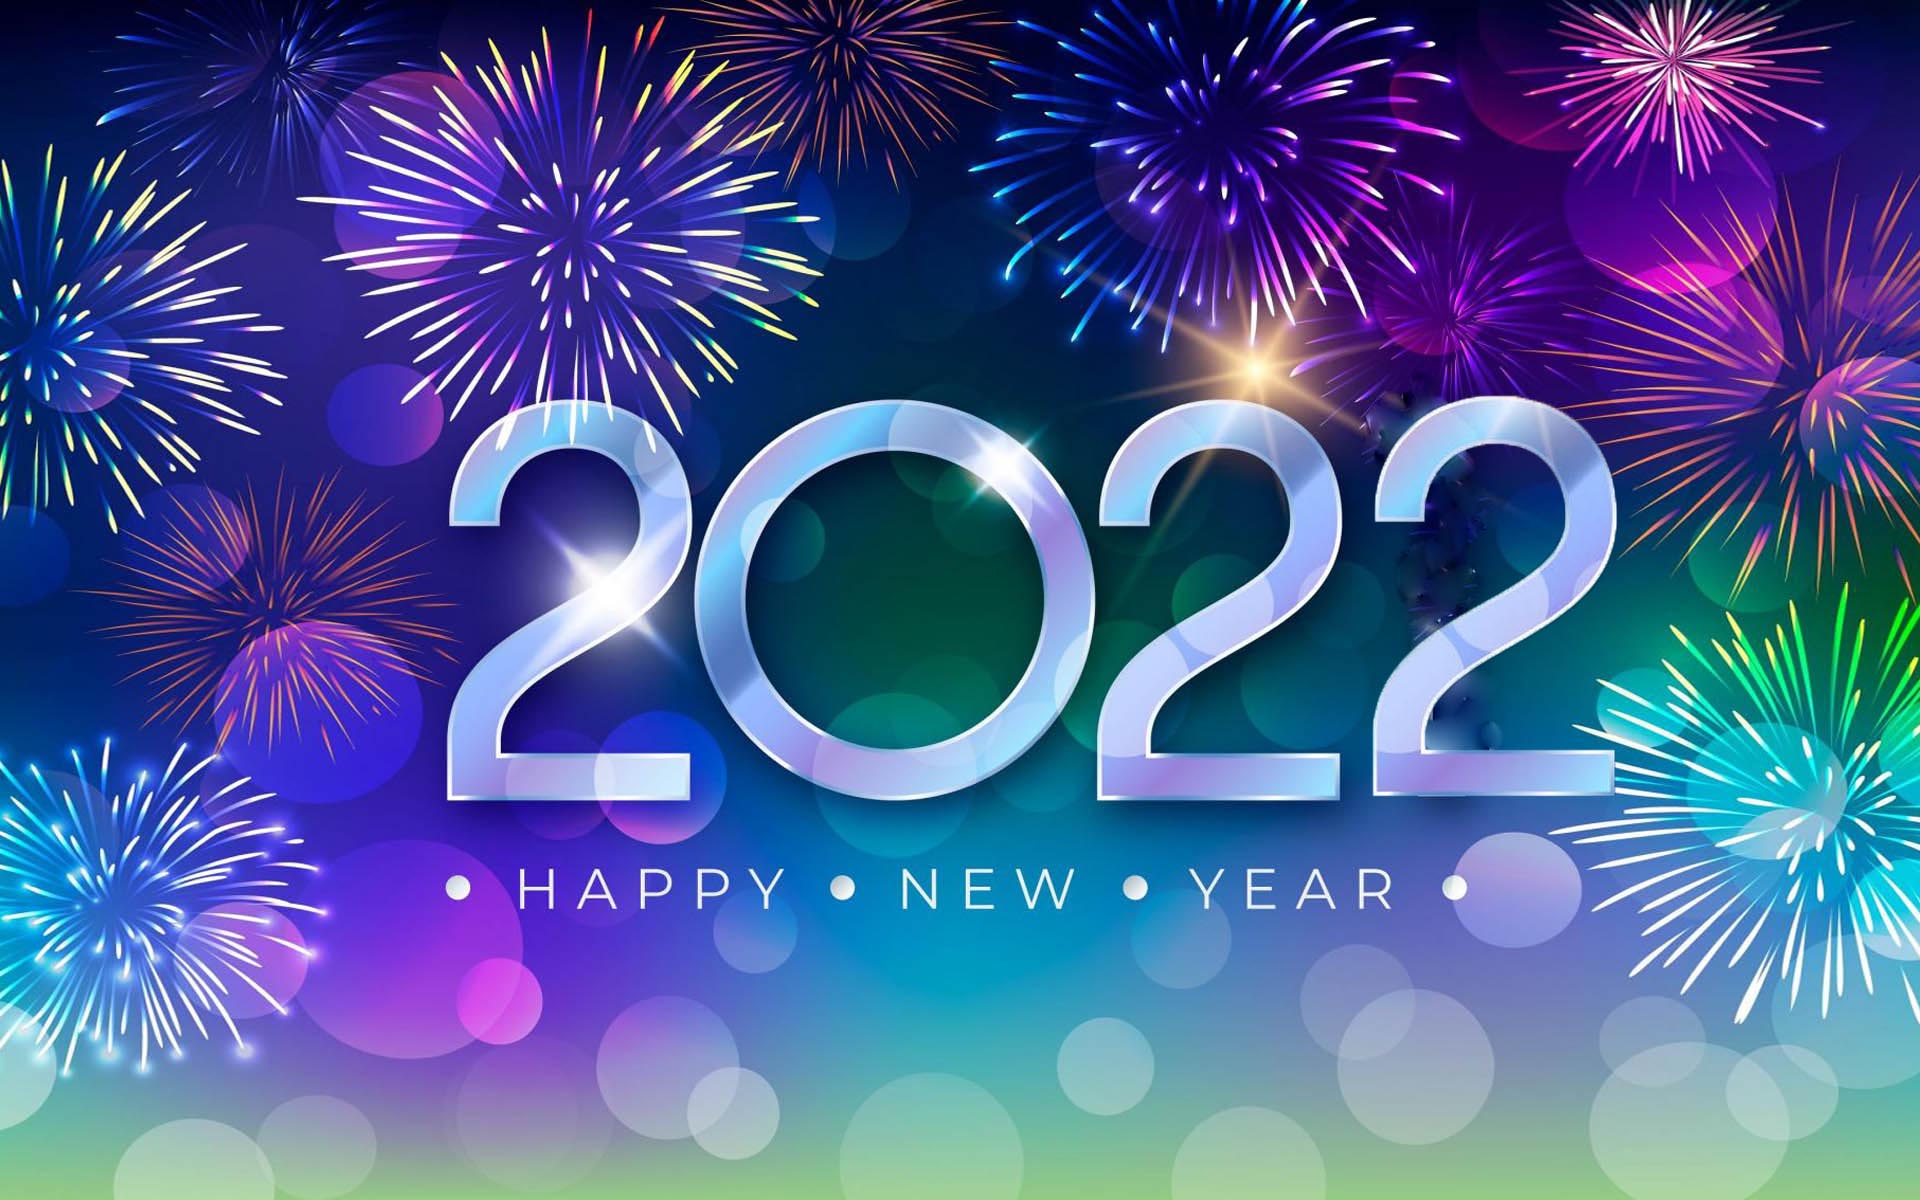 Happy New Year 2022 With Firework Background Vector Wallpaper Hd   Wallpapers13com